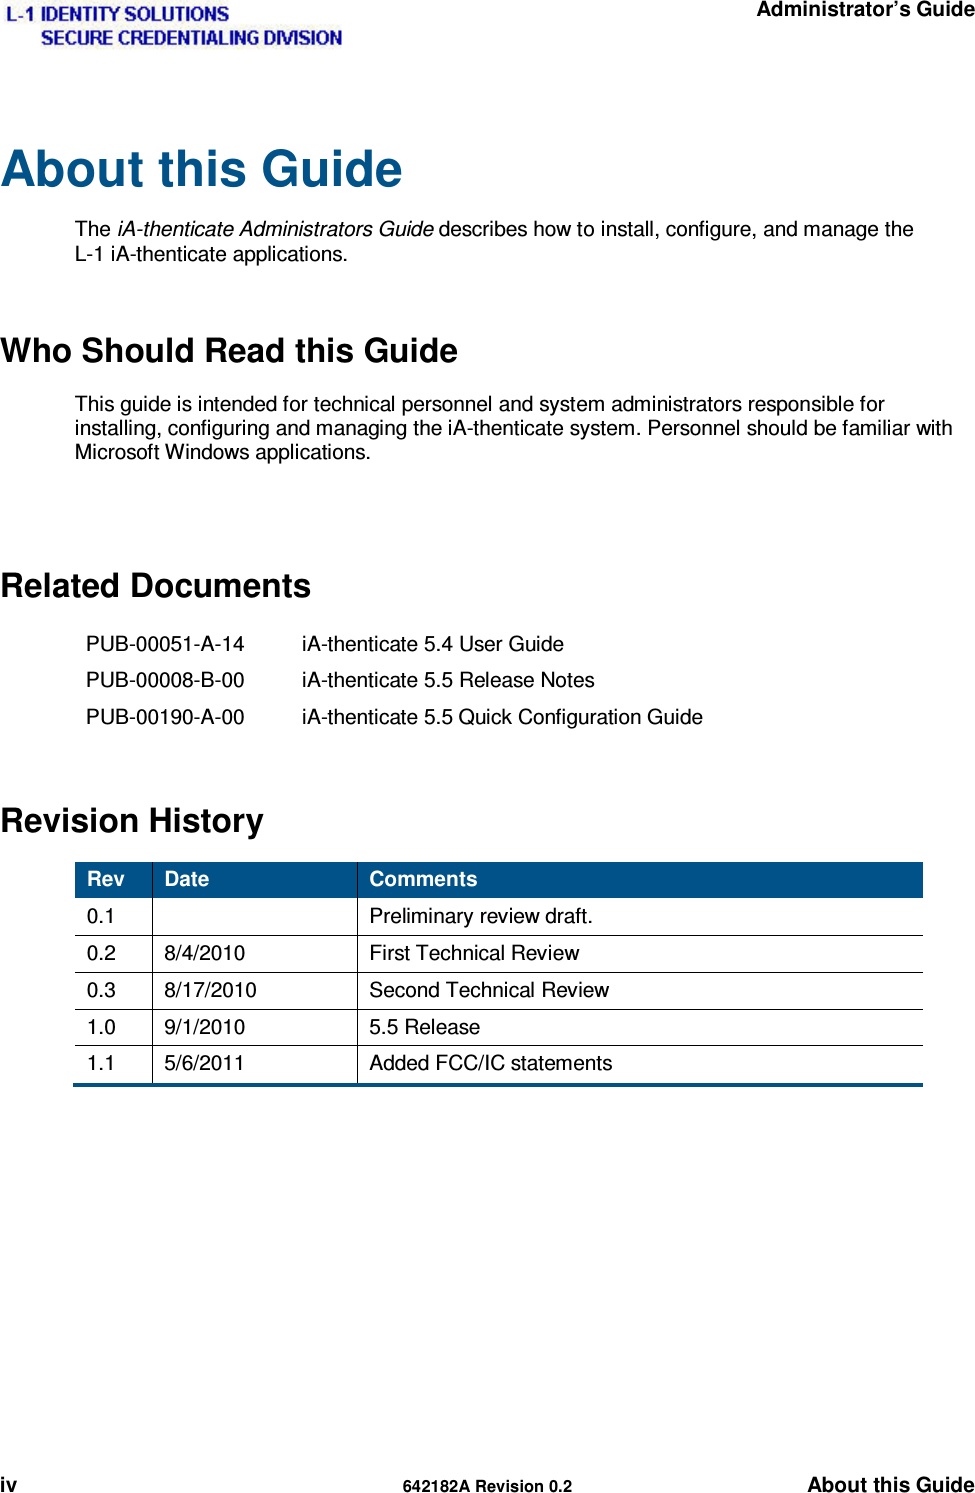   Administrator’s Guide iv  642182A Revision 0.2 About this Guide About this Guide  The iA-thenticate Administrators Guide describes how to install, configure, and manage the L-1 iA-thenticate applications. Who Should Read this Guide This guide is intended for technical personnel and system administrators responsible for installing, configuring and managing the iA-thenticate system. Personnel should be familiar with Microsoft Windows applications.  Related Documents PUB-00051-A-14  iA-thenticate 5.4 User Guide PUB-00008-B-00  iA-thenticate 5.5 Release Notes PUB-00190-A-00  iA-thenticate 5.5 Quick Configuration Guide Revision History Rev  Date  Comments 0.1   Preliminary review draft. 0.2 8/4/2010  First Technical Review 0.3 8/17/2010  Second Technical Review 1.0 9/1/2010  5.5 Release 1.1 5/6/2011  Added FCC/IC statements  